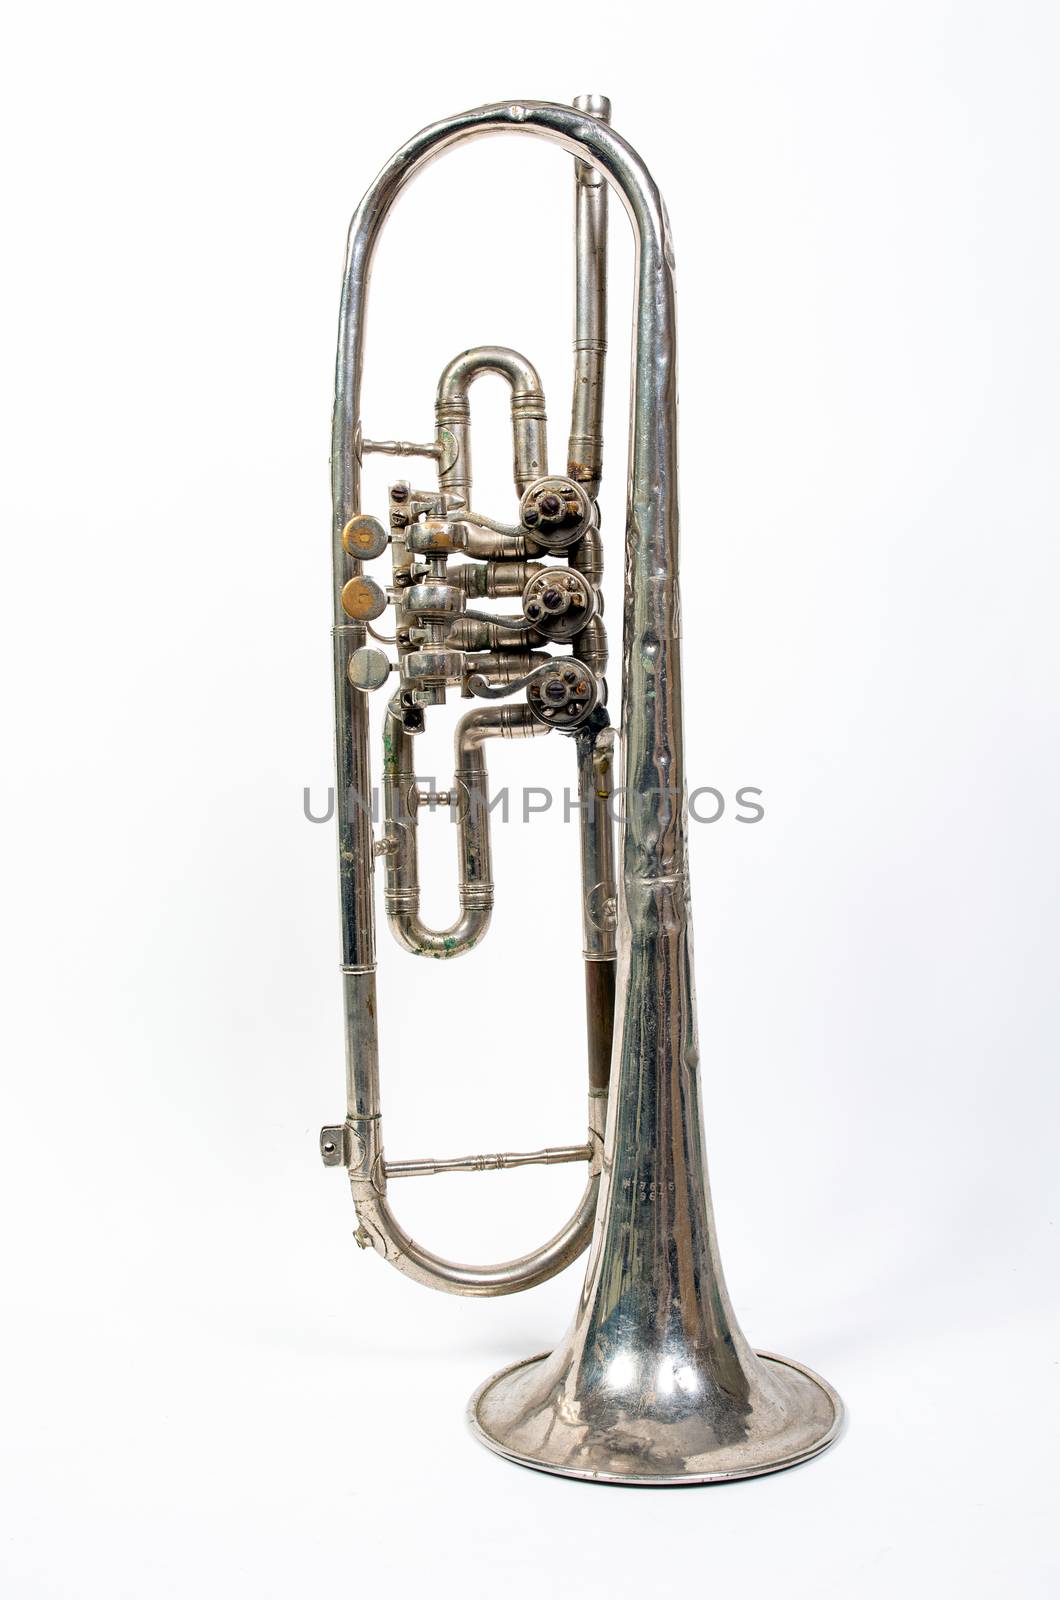 silver trumpet old isolated on a white background. Musical instrument worth